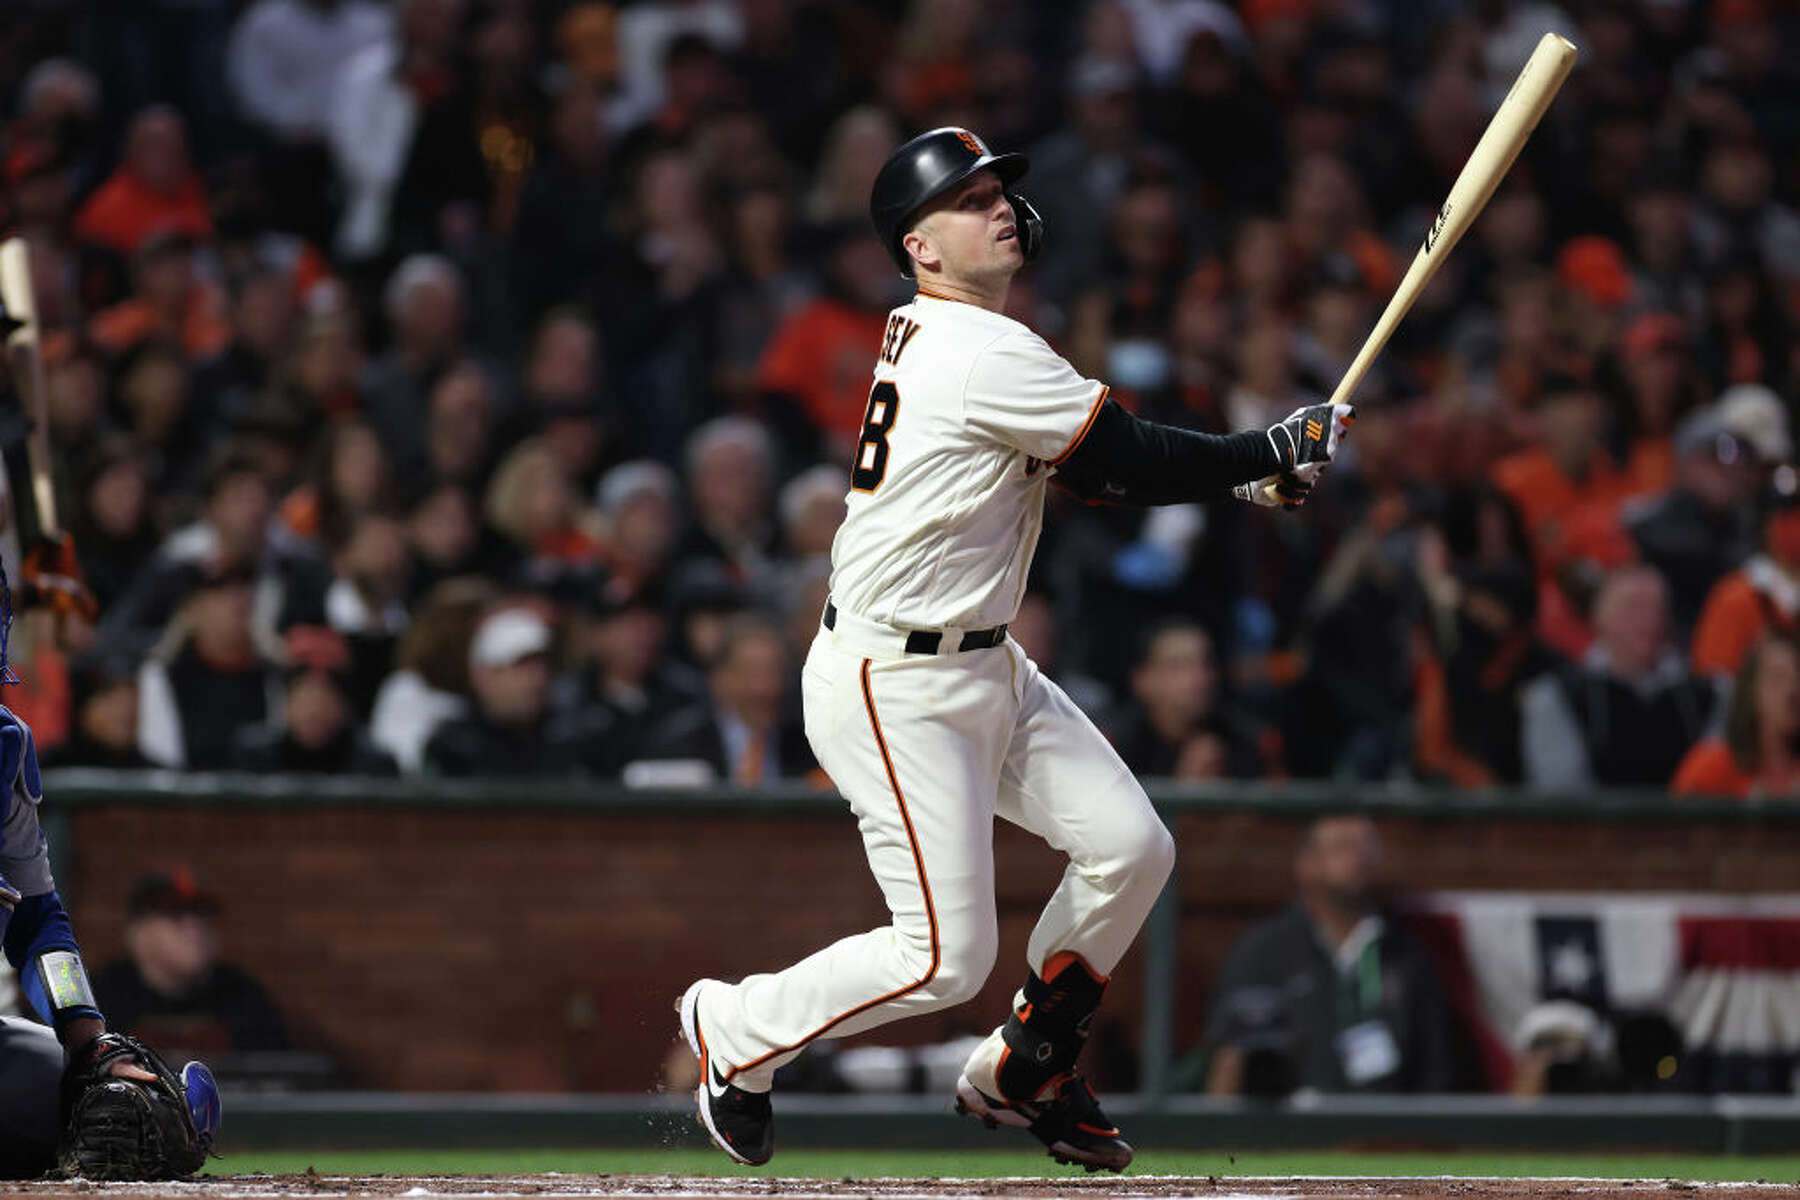 Dodgers lose one to remember on Buster Posey's walk-off homer, 2-1